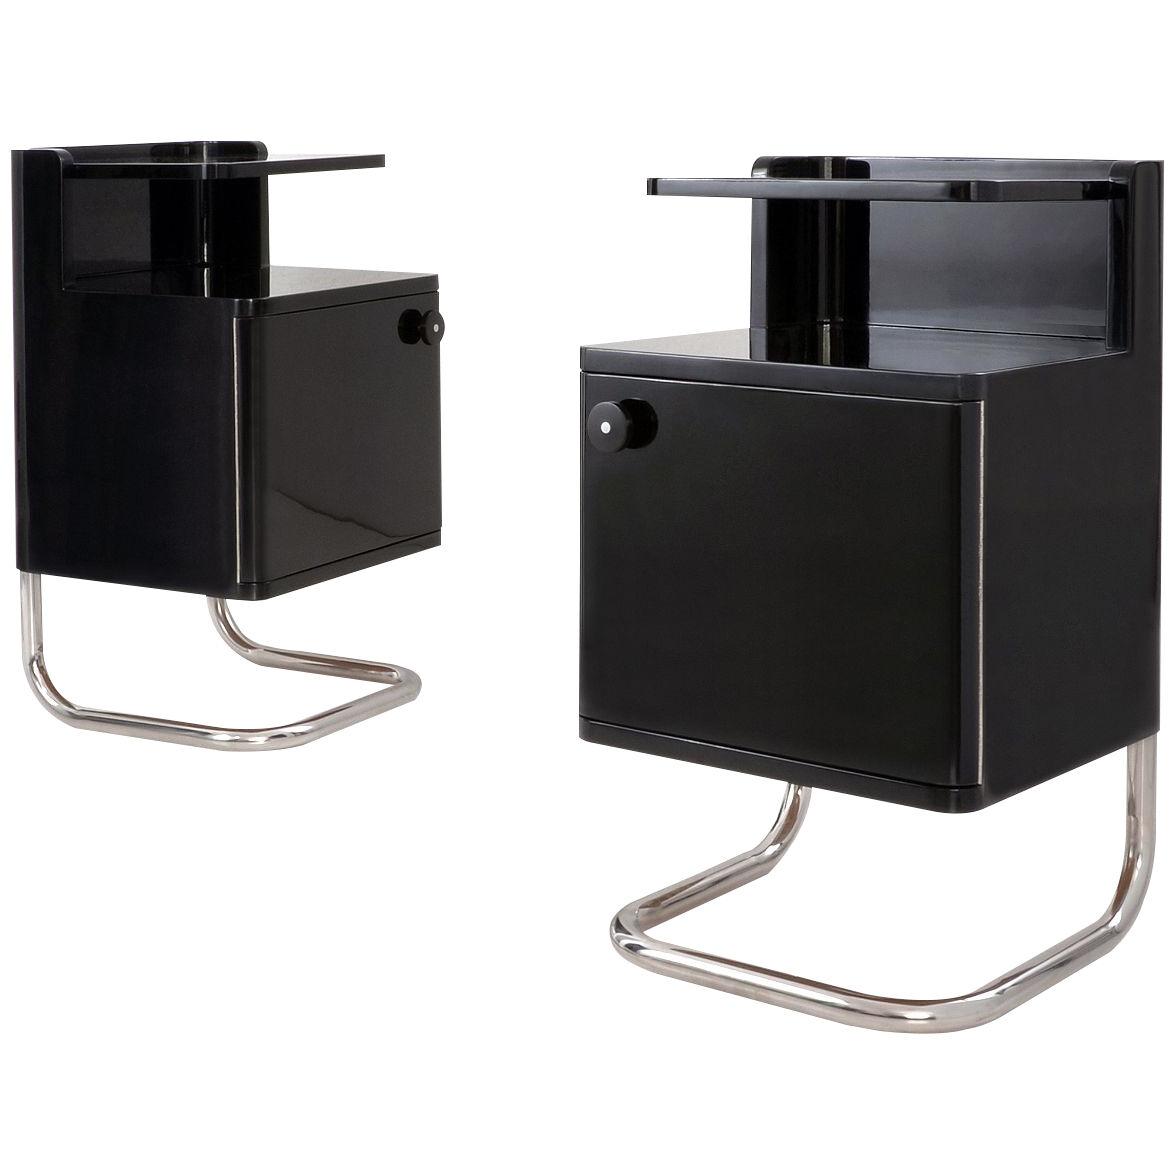 Modern contemporary customizable bedside cabinets, high gloss lacquered wood